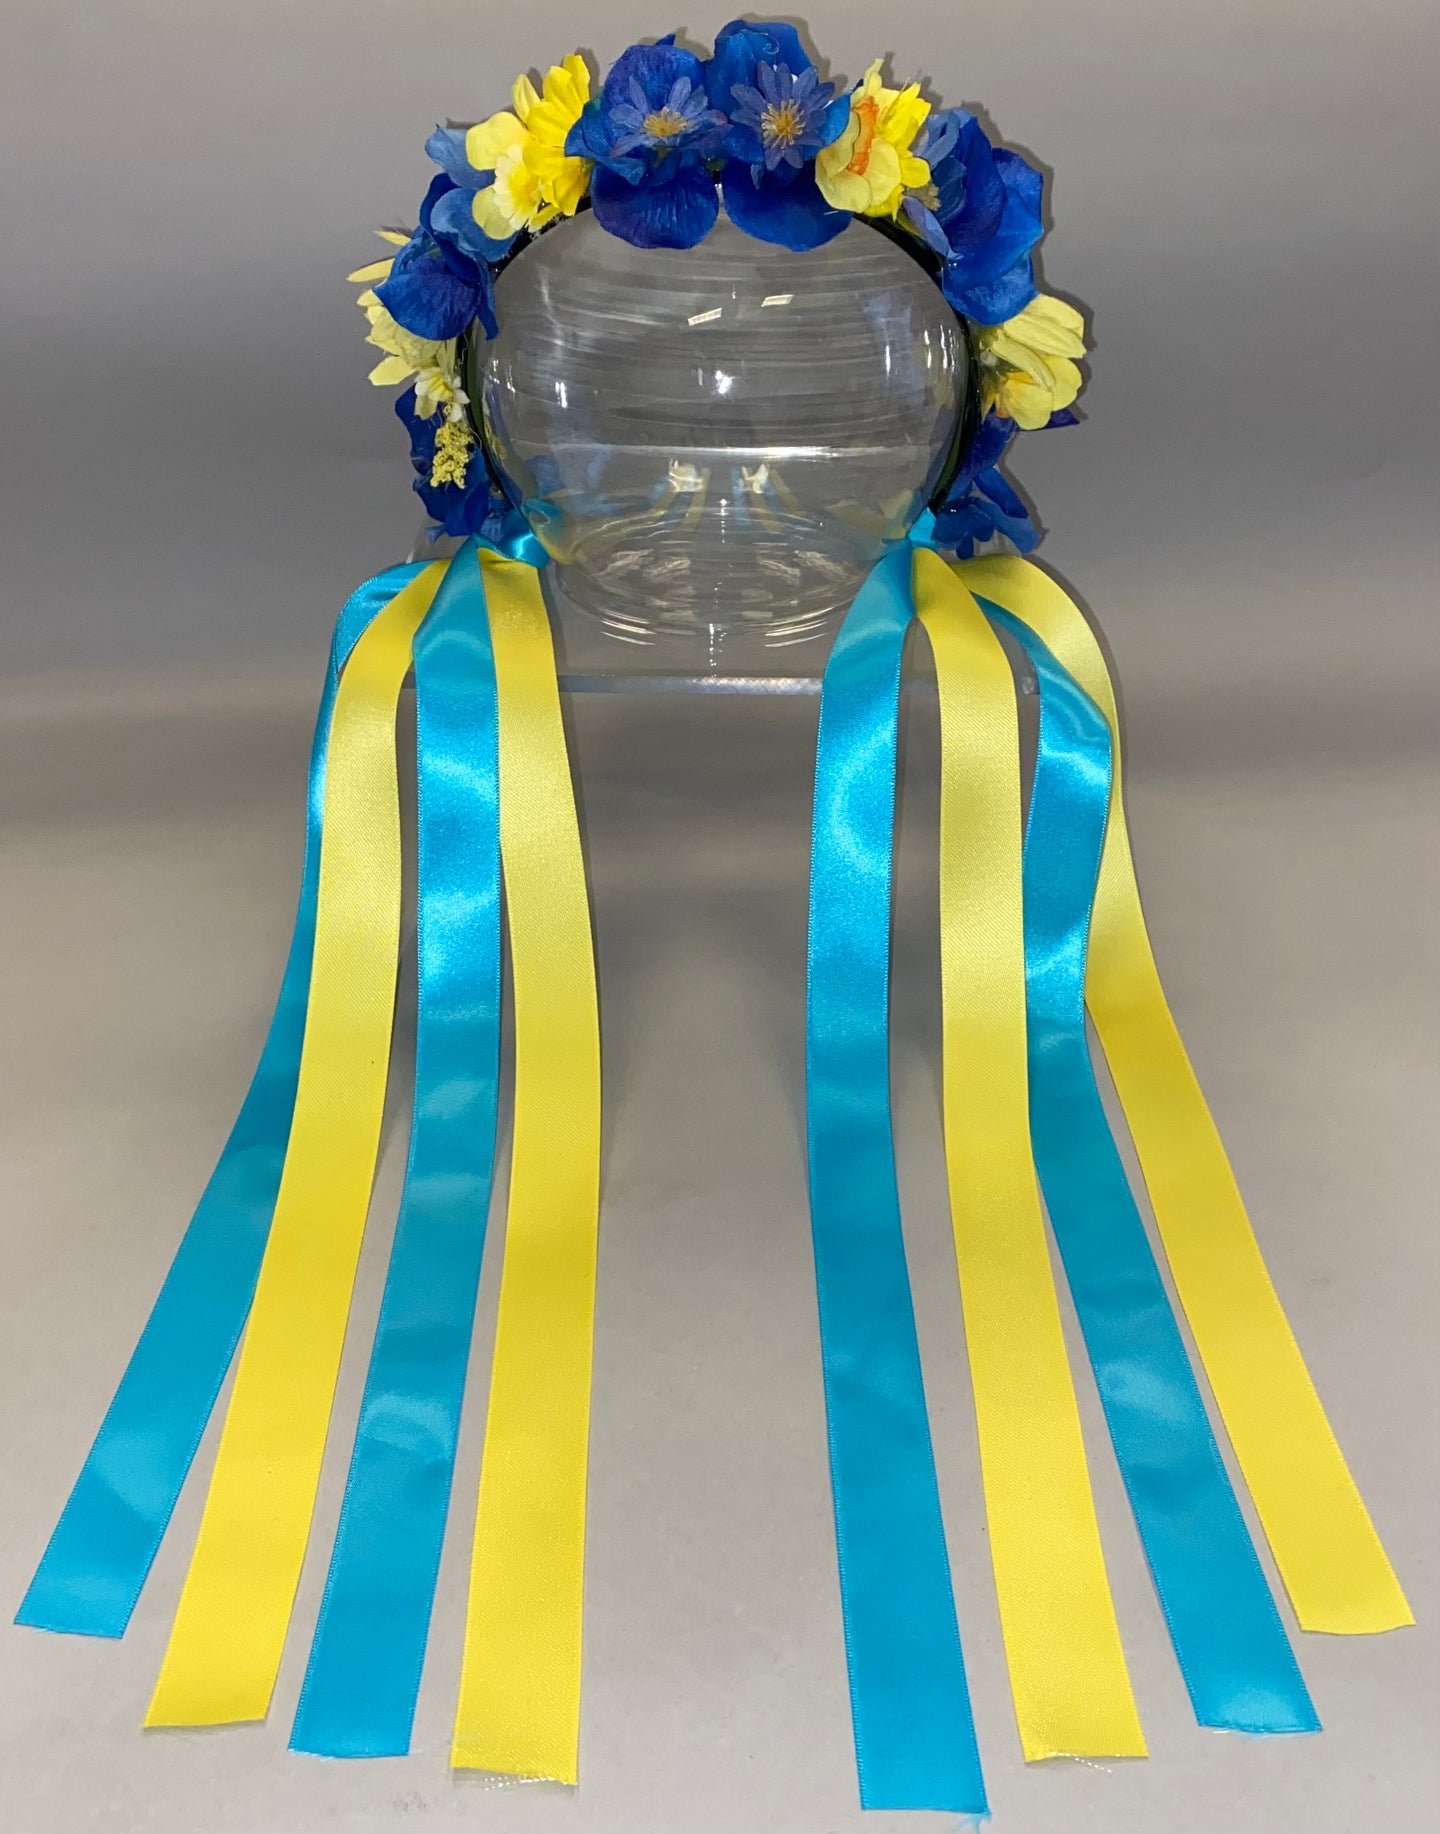 Vinok with blue & yellow flowers ,blue & yellow ribbons